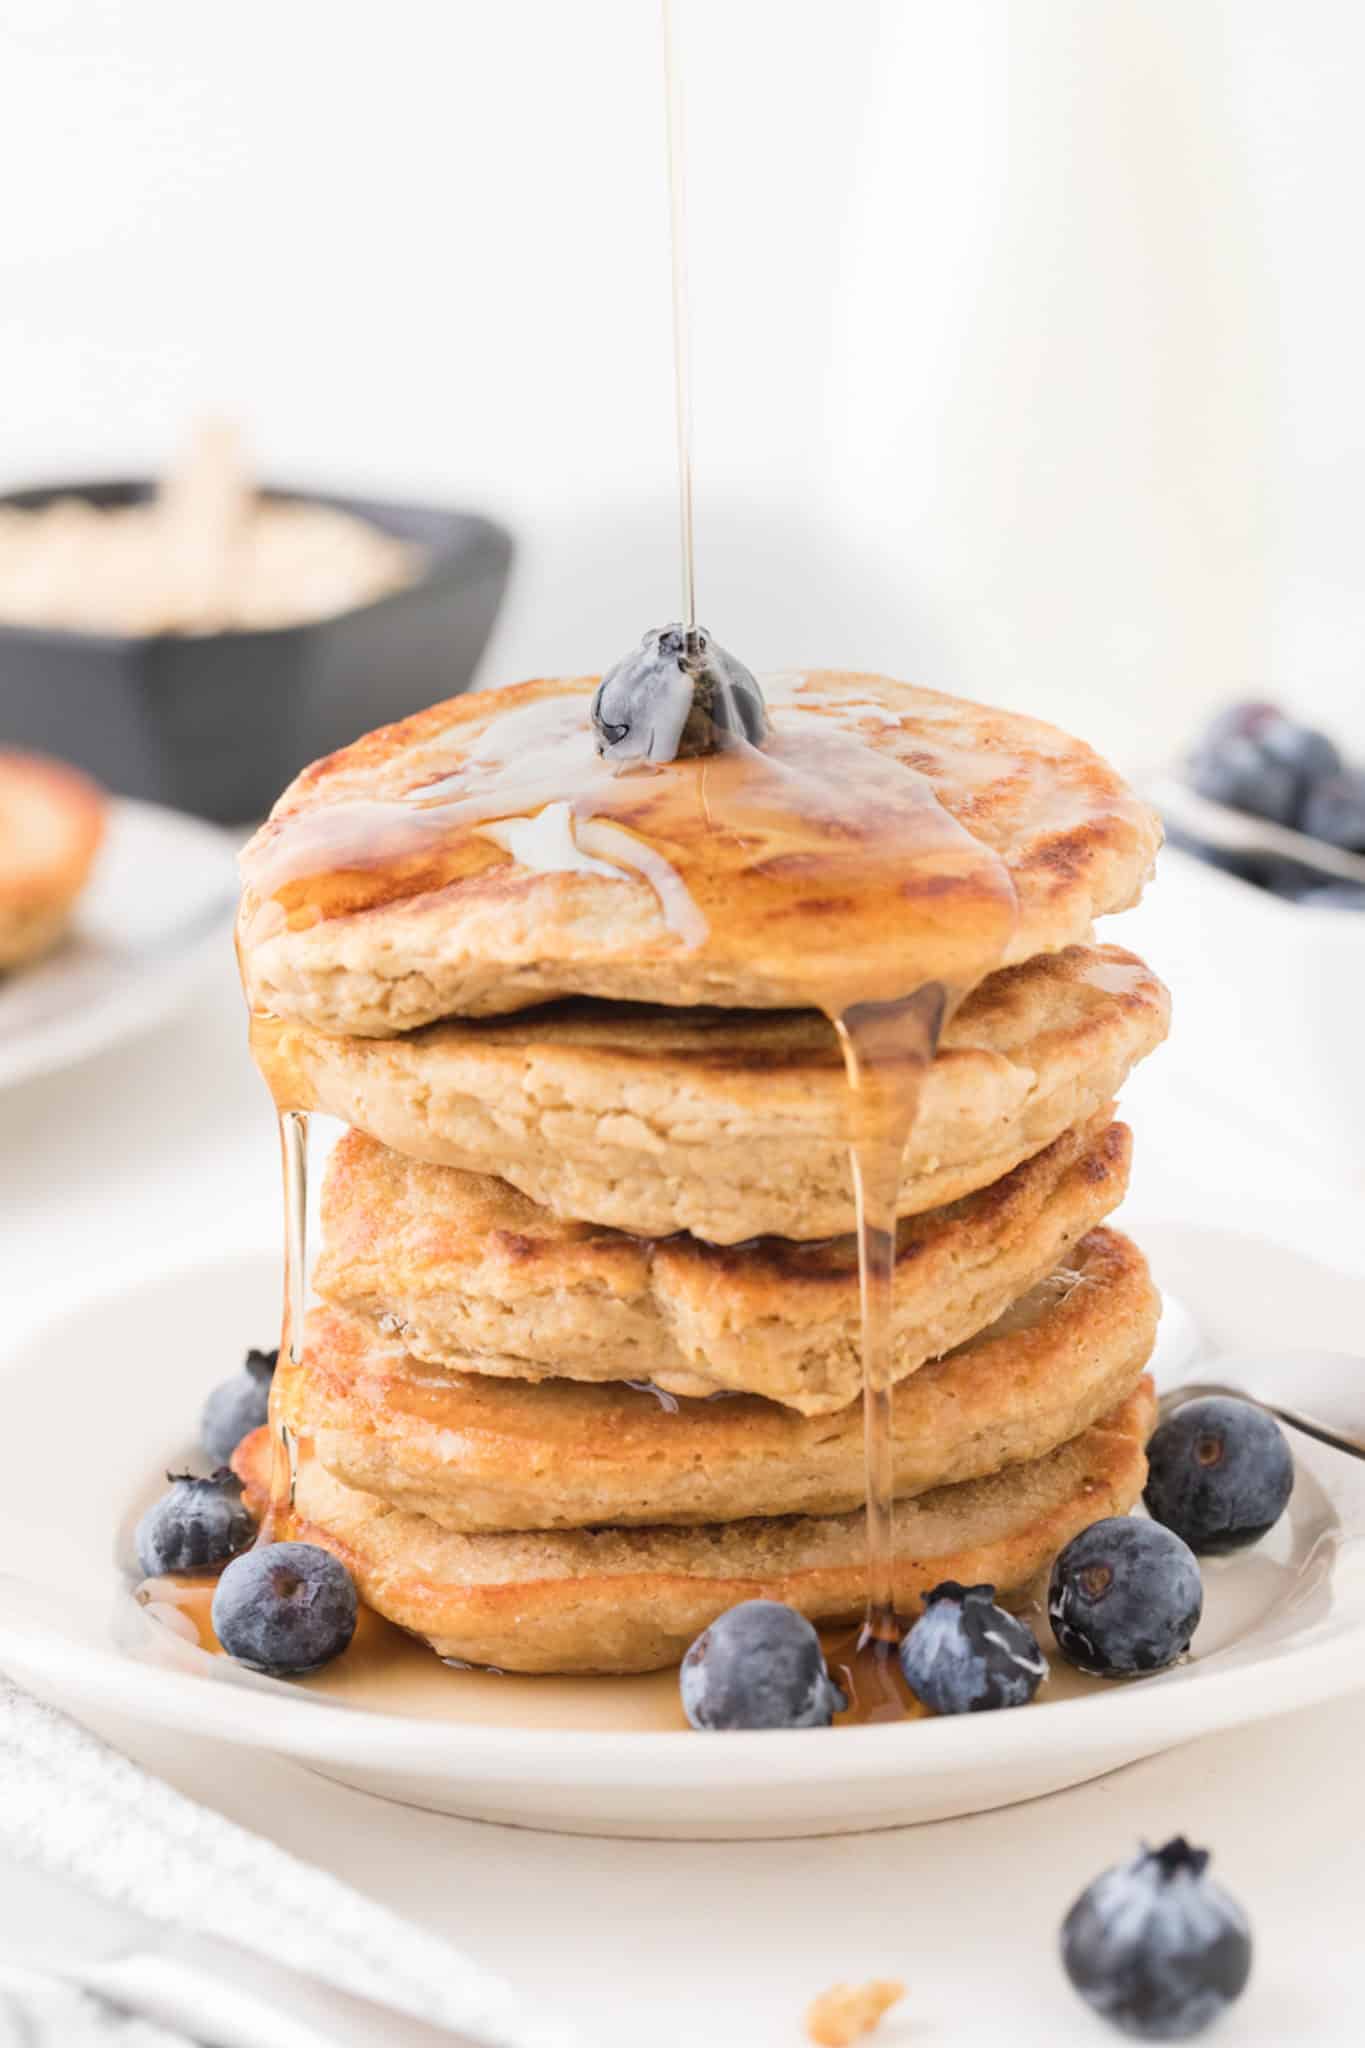 https://www.cleaneatingkitchen.com/wp-content/uploads/2021/12/oat-flour-pancakes-with-syrup-hero-scaled.jpg